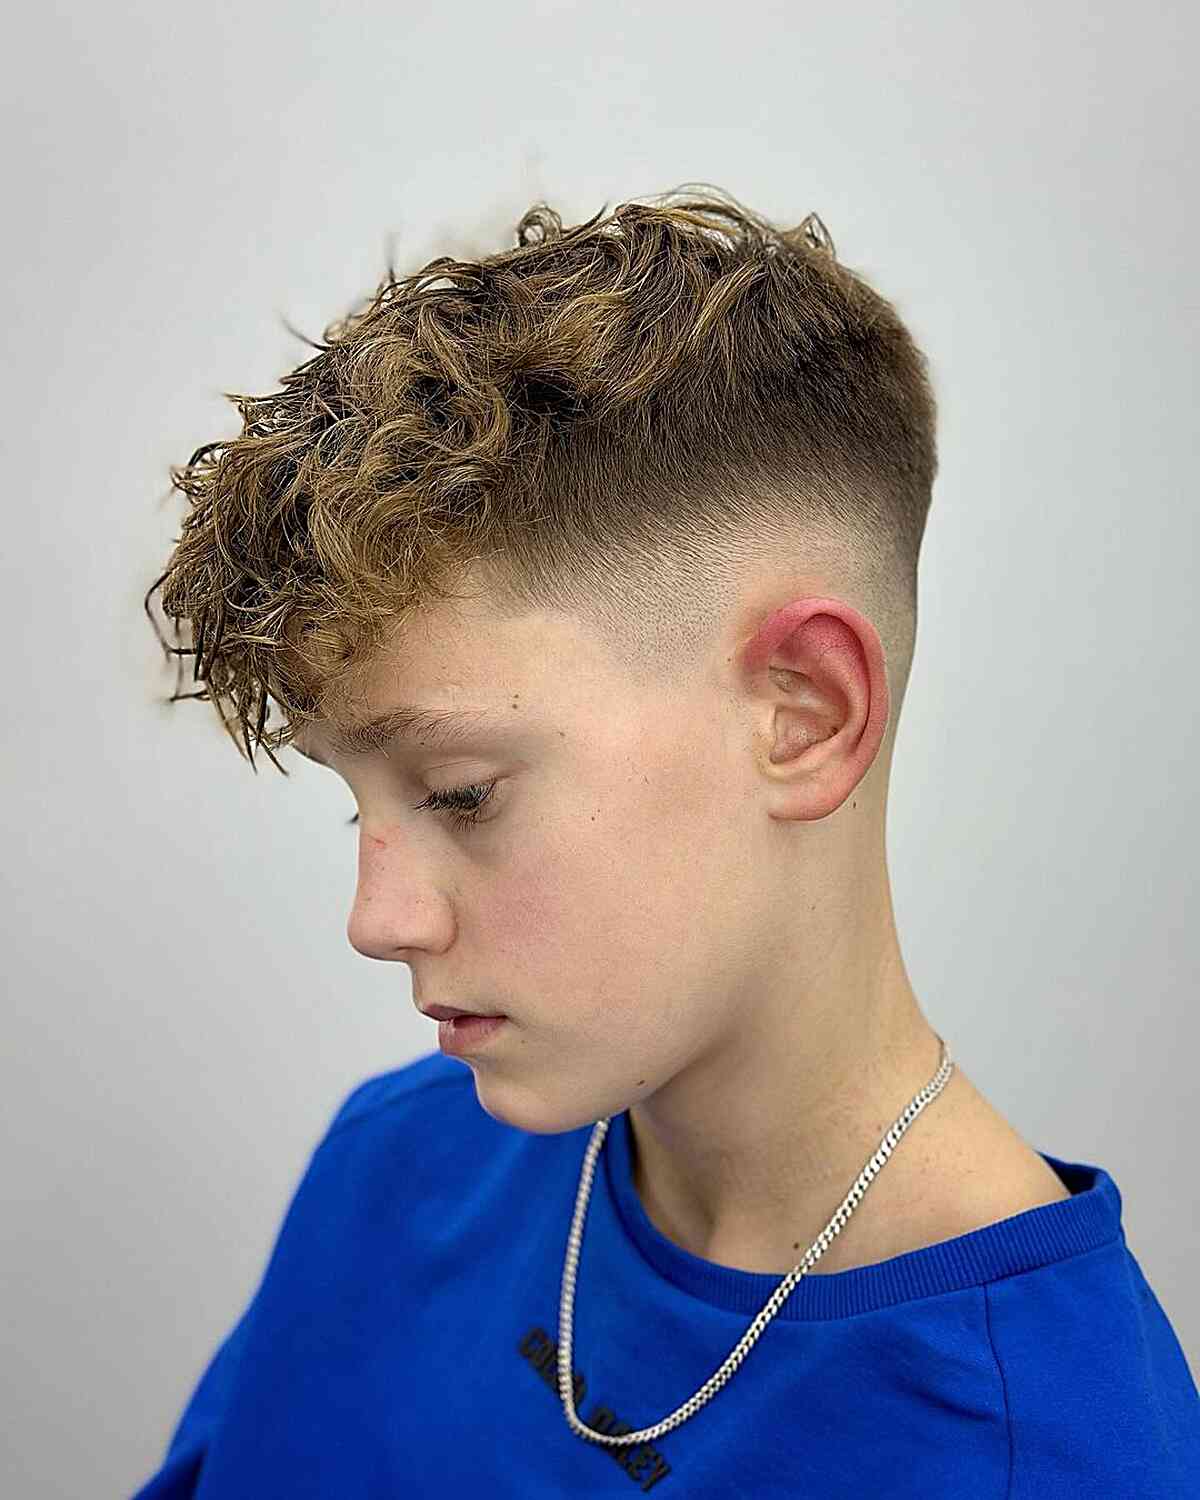 Mid Fade with a Messy, Curly Top for Boys